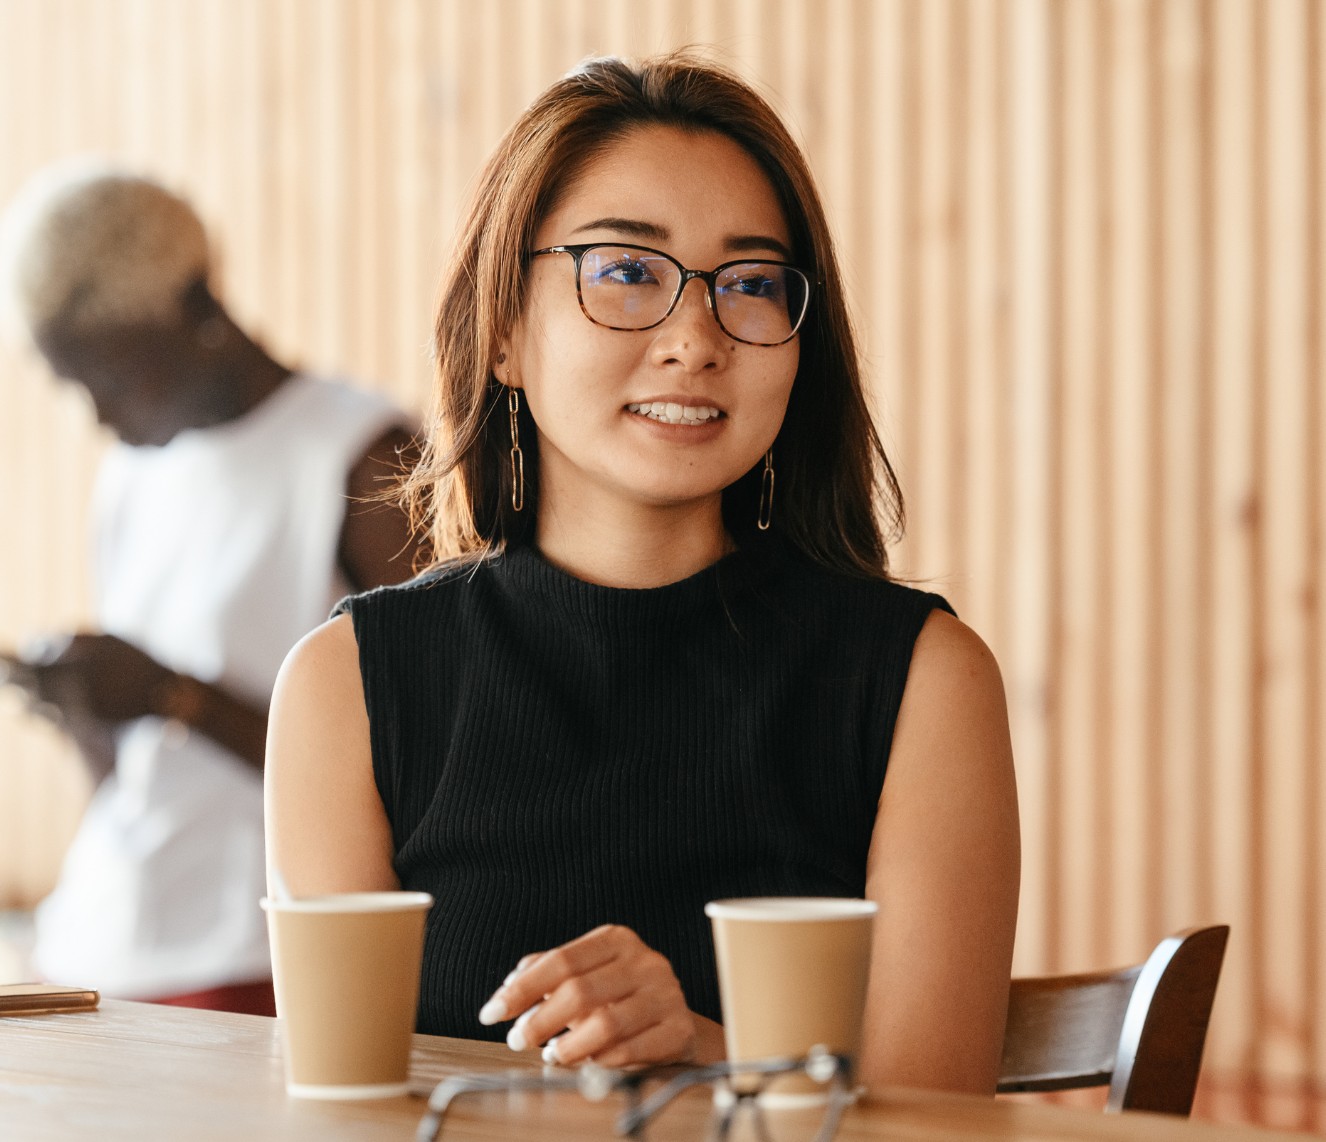 A young Asian woman is dressed professionally and is sitting at a cafe. She has two coffee cups in front of her and she is wearing glasses. She is speaking to someone.